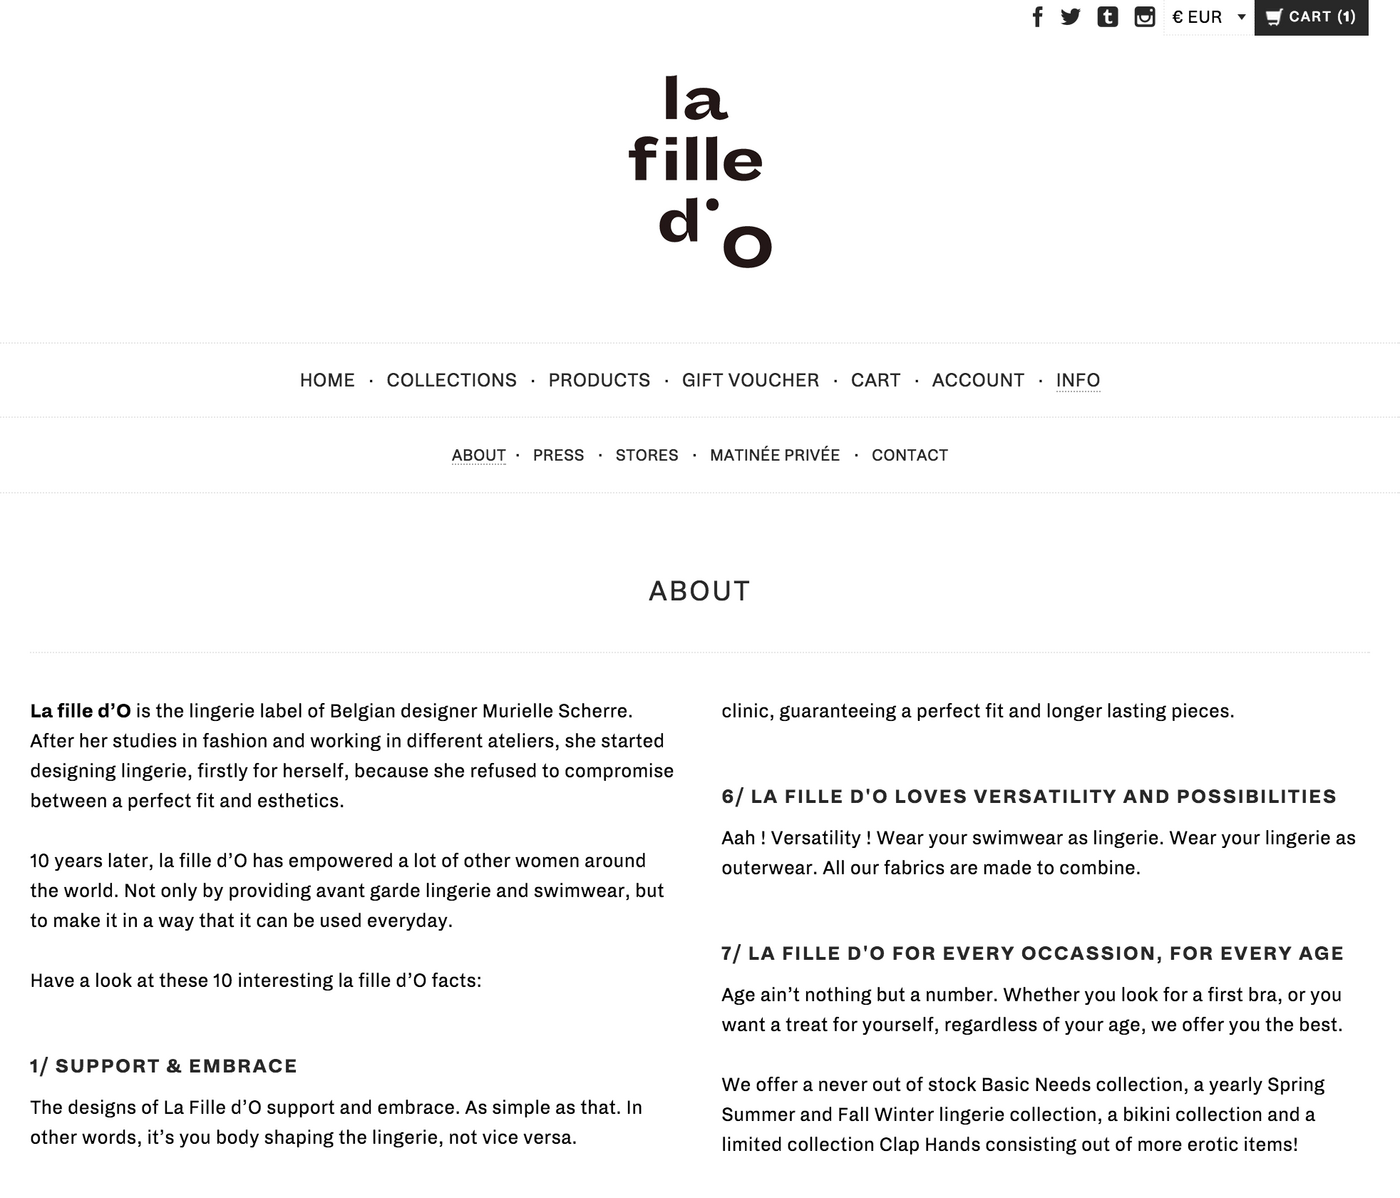 La Fille d’O identity and website (2015) - Fonts In Use